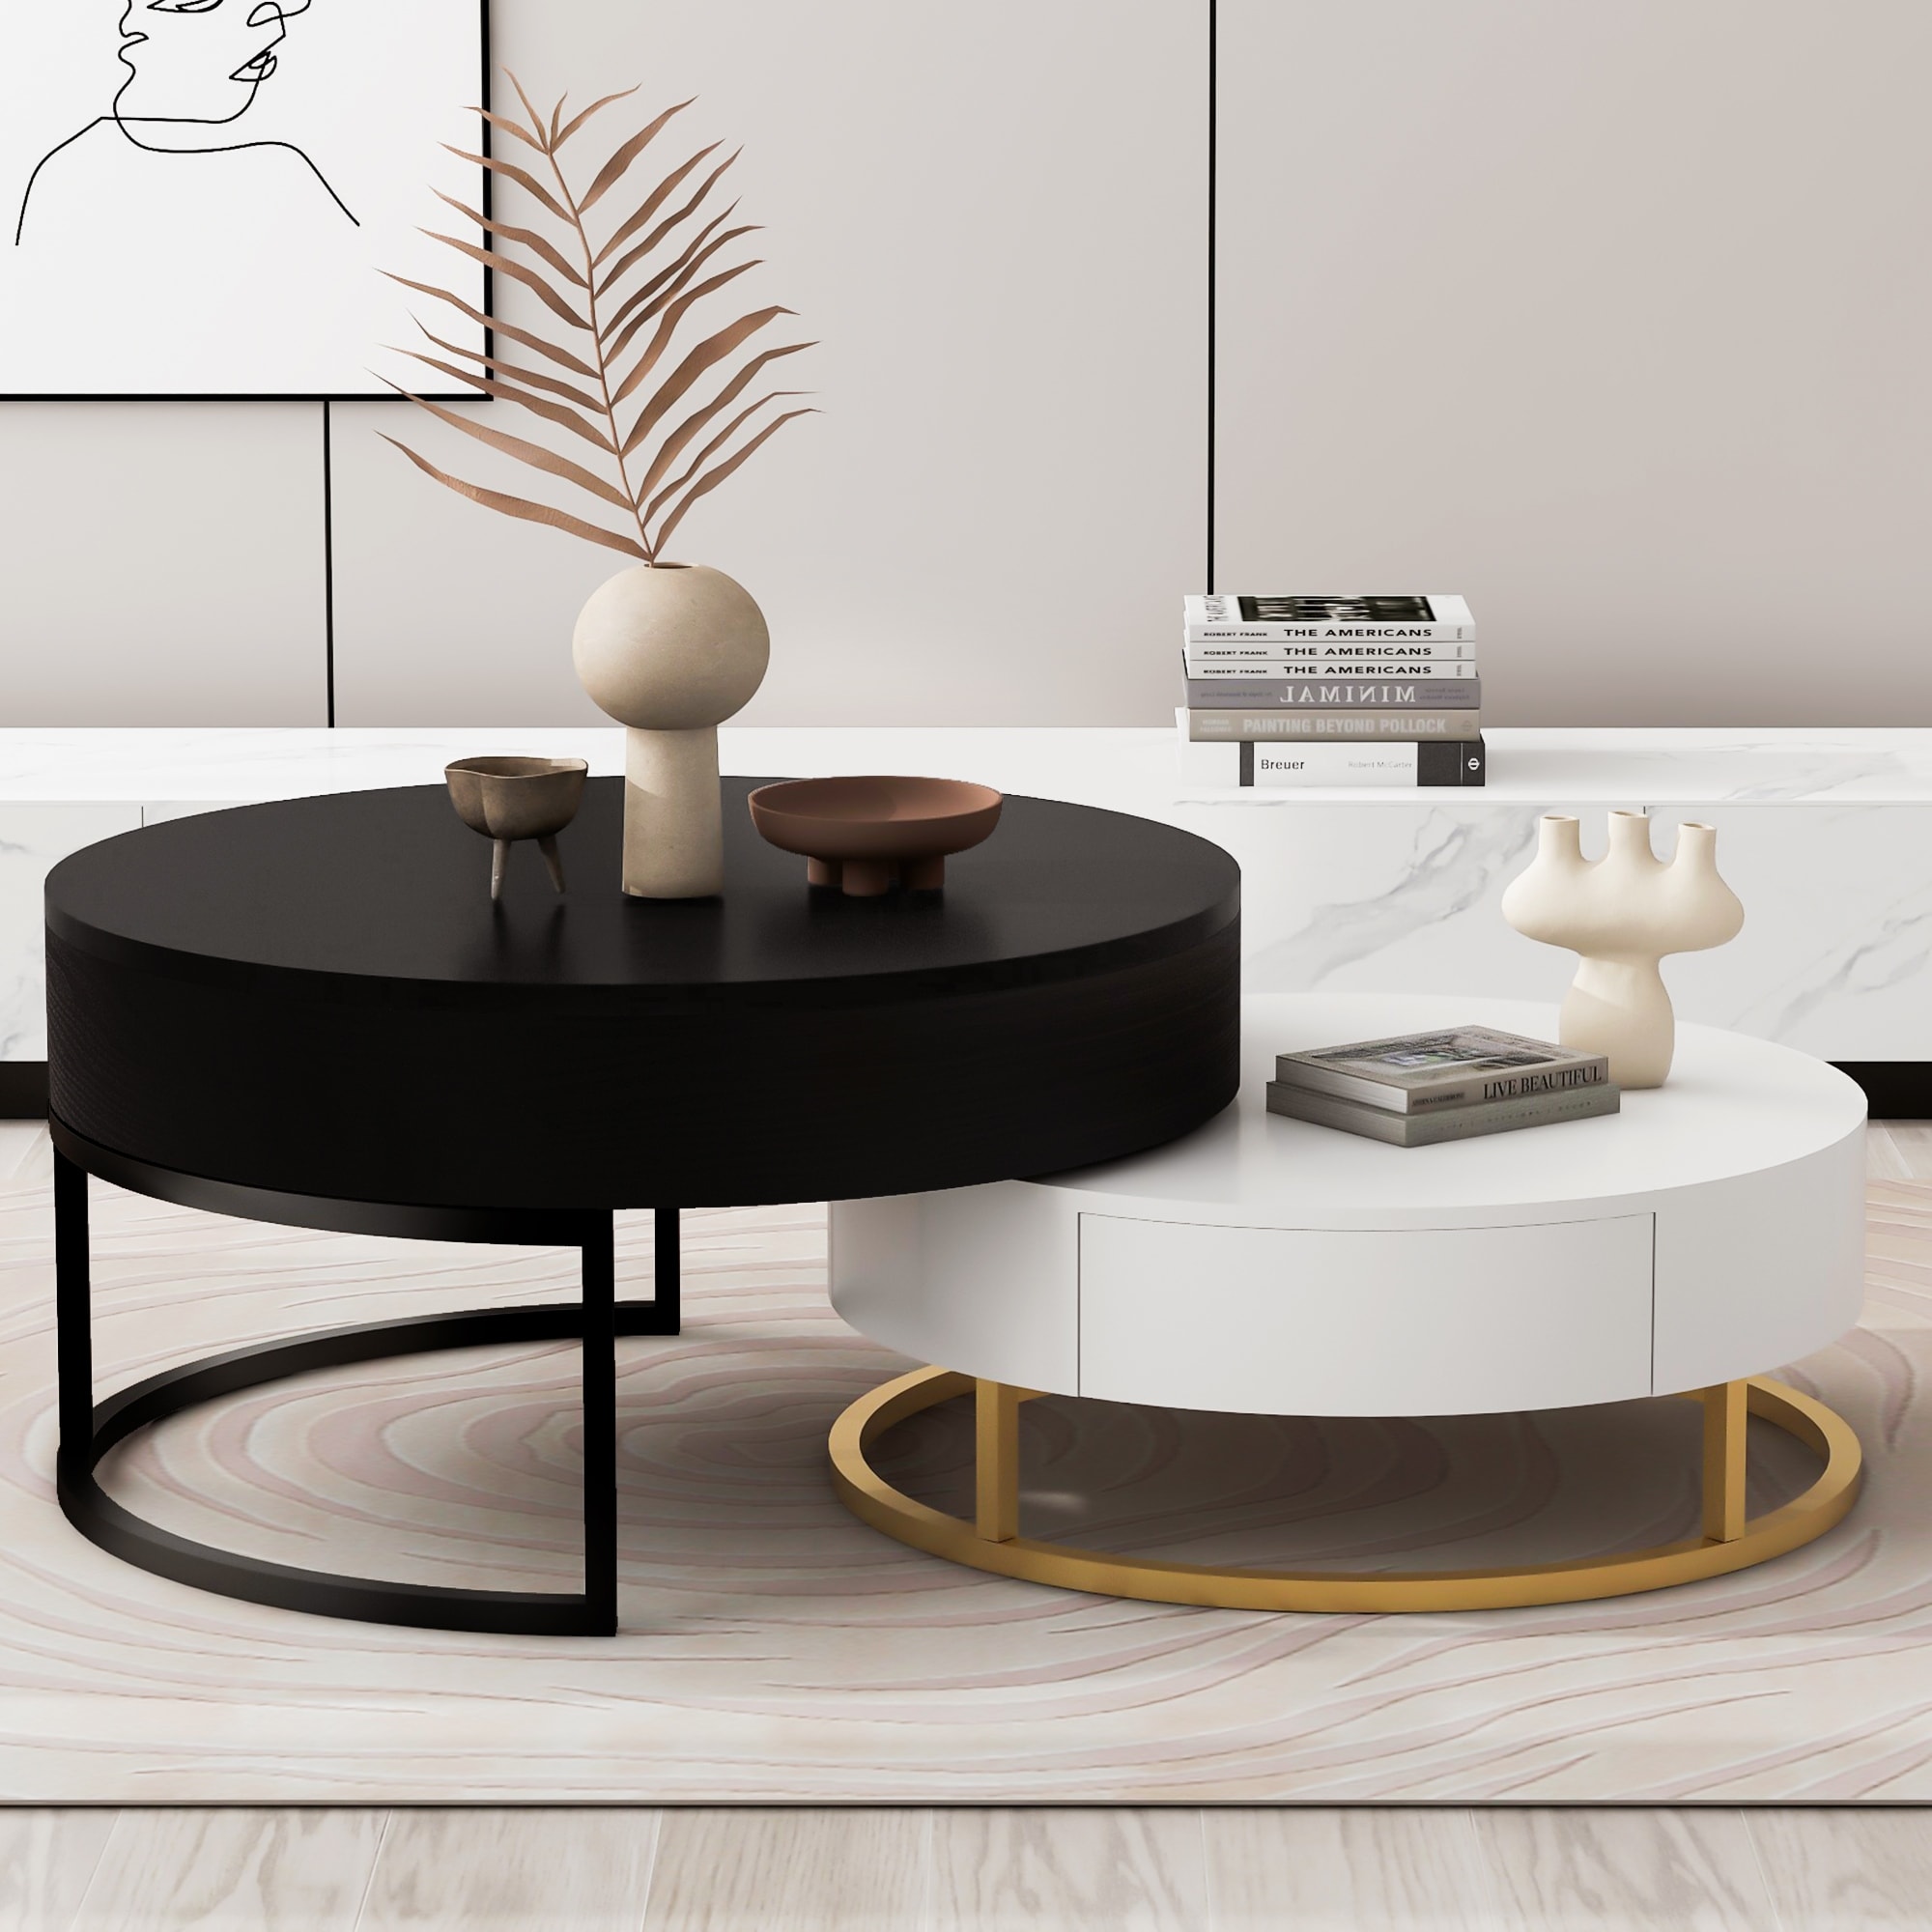 https://ak1.ostkcdn.com/images/products/is/images/direct/925a117e331d0b8fa6fe5bad1c01780d2e32615c/Modern-Round-Lift-top-Nesting-Coffee-Table-Set-with-2-Drawers%2C-Unique-Design-Cocktail-Table%2C-Center-Table-with-Hidden-Storage.jpg